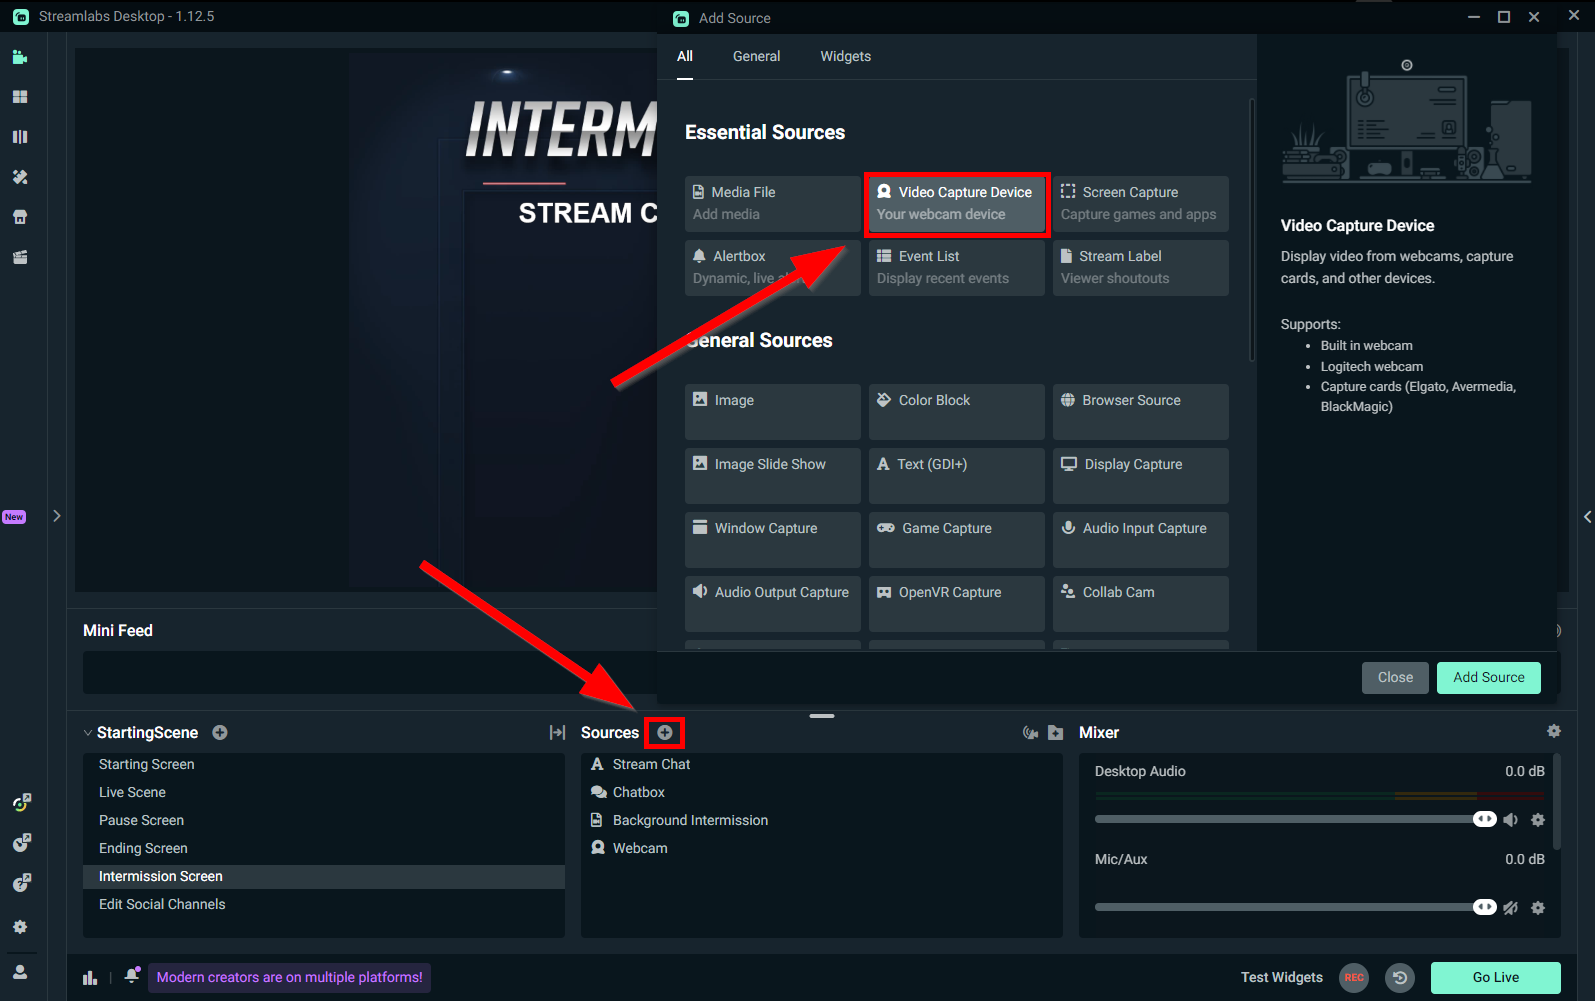 How to add capture card as source in Streamlabs OBS.